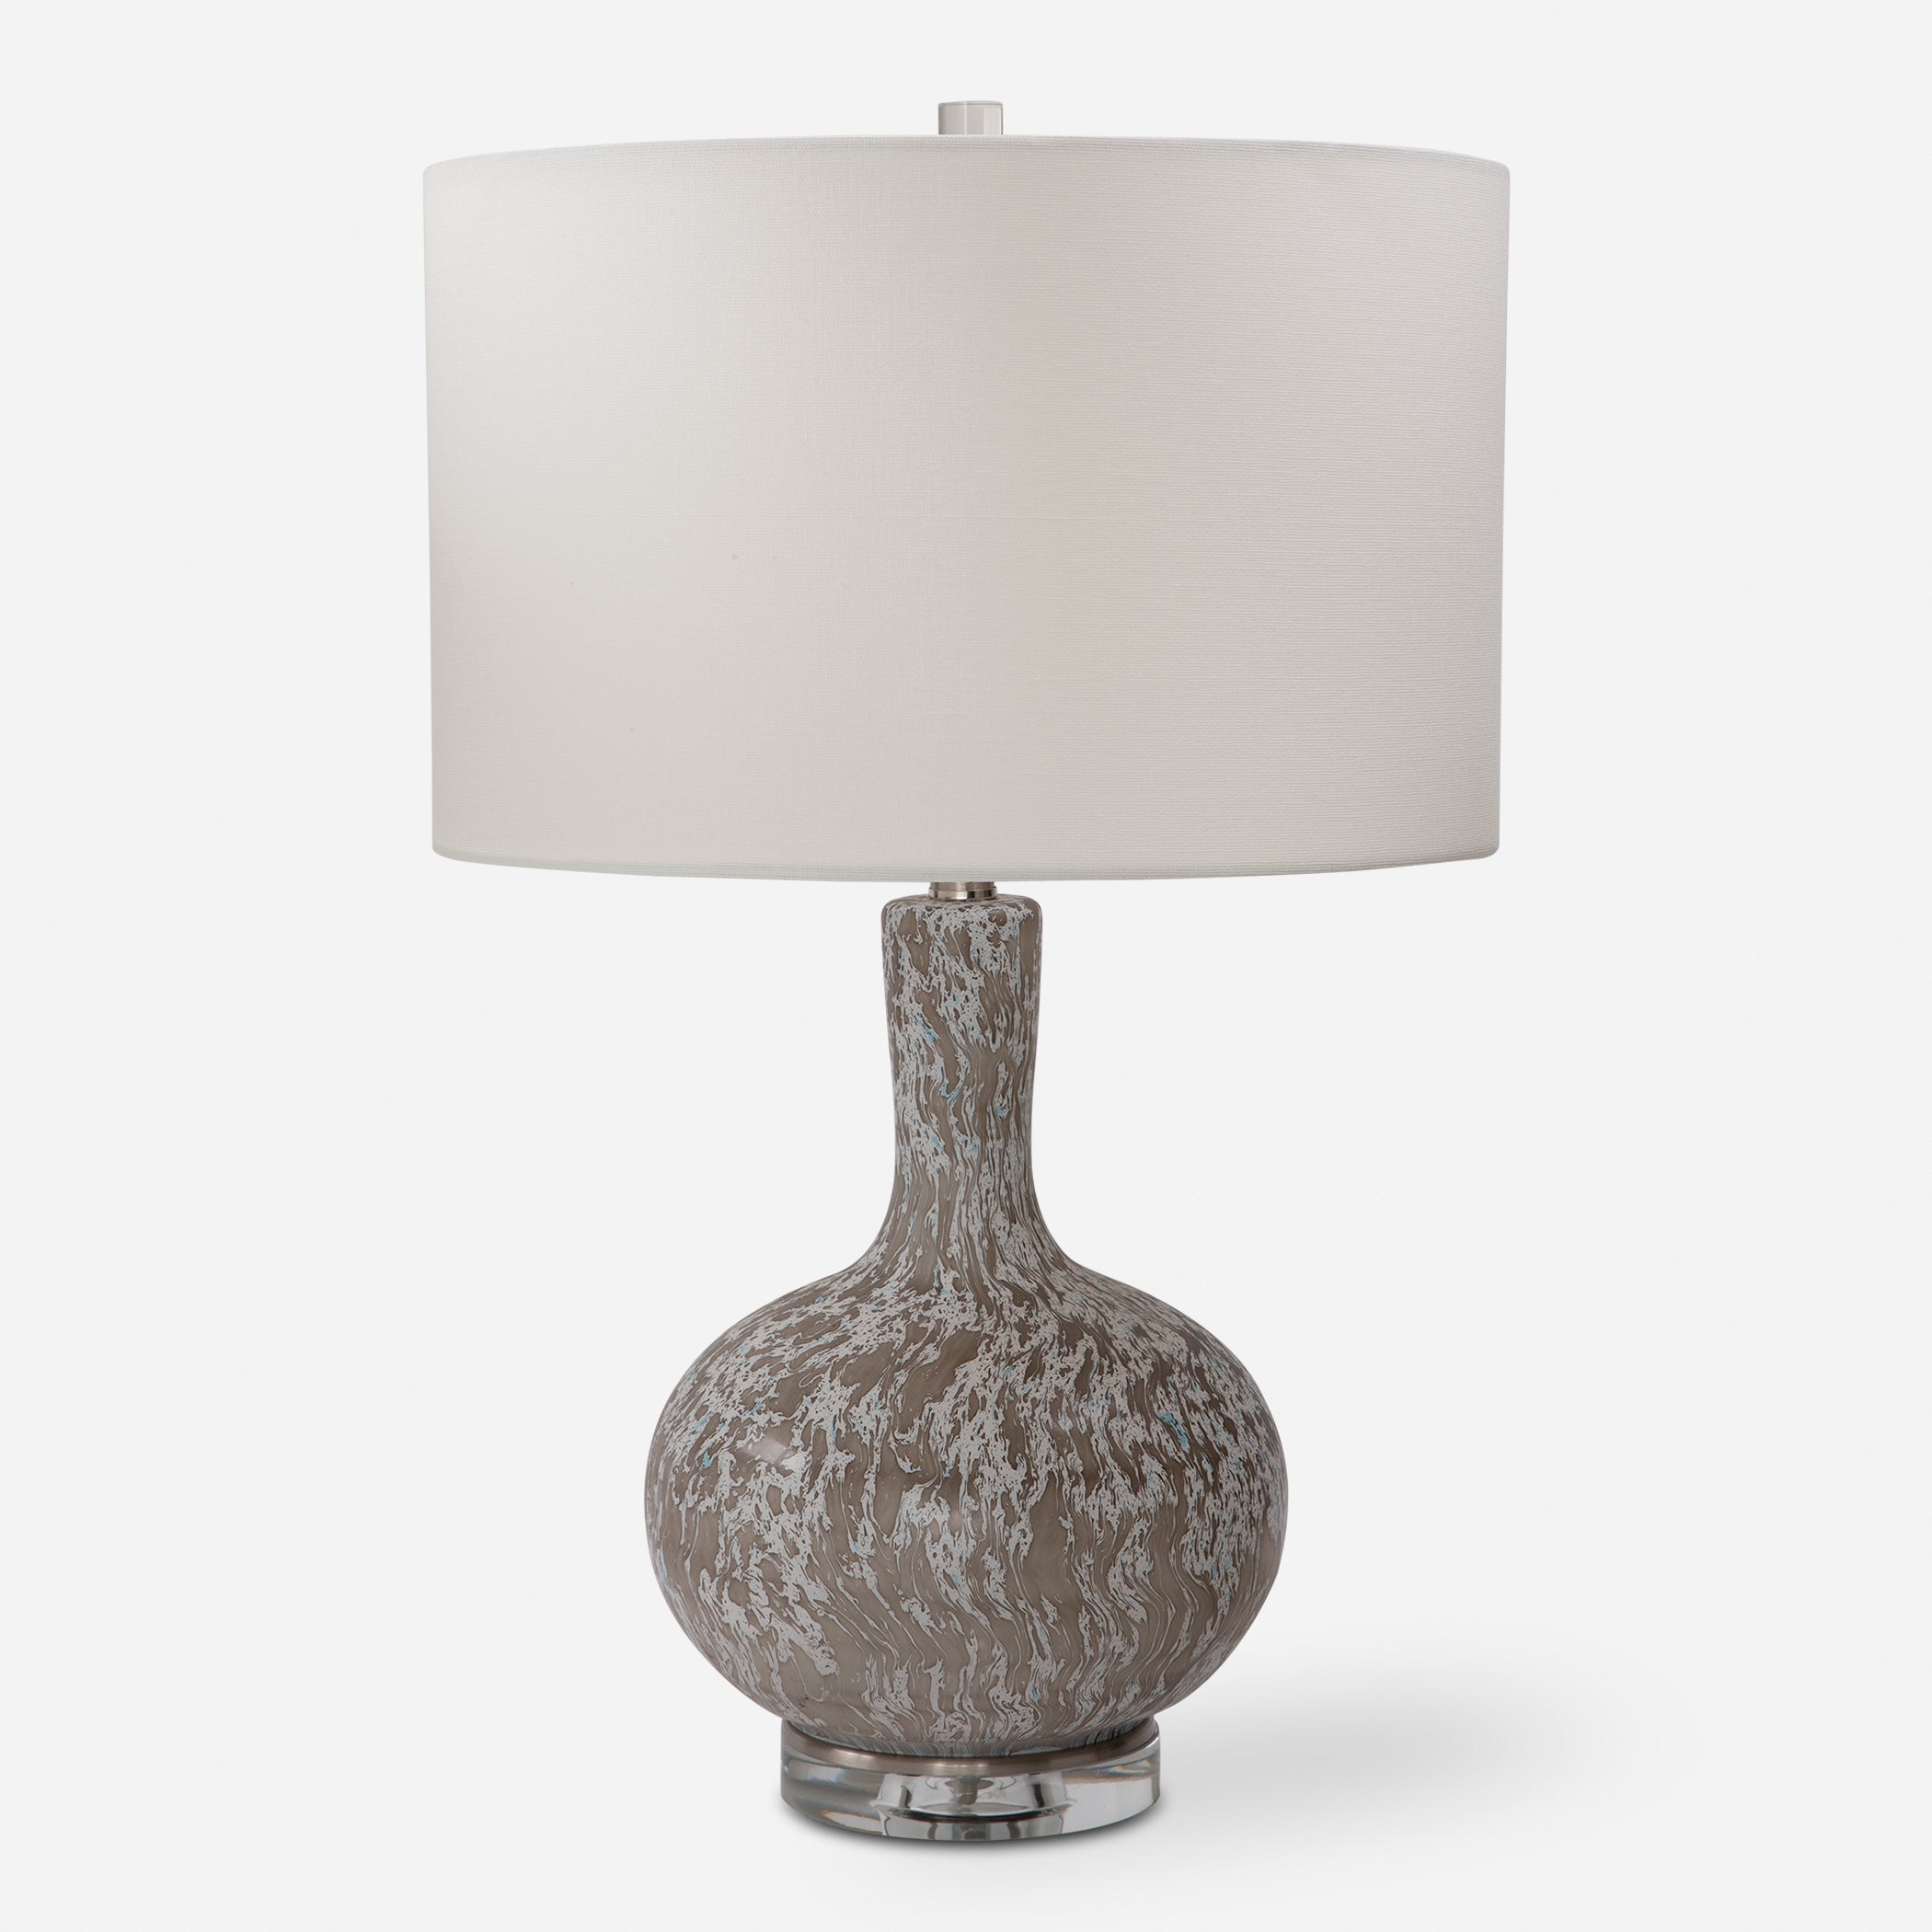 Uttermost Turbulence Distressed White Table Lamp Distressed White Table Lamp Uttermost   